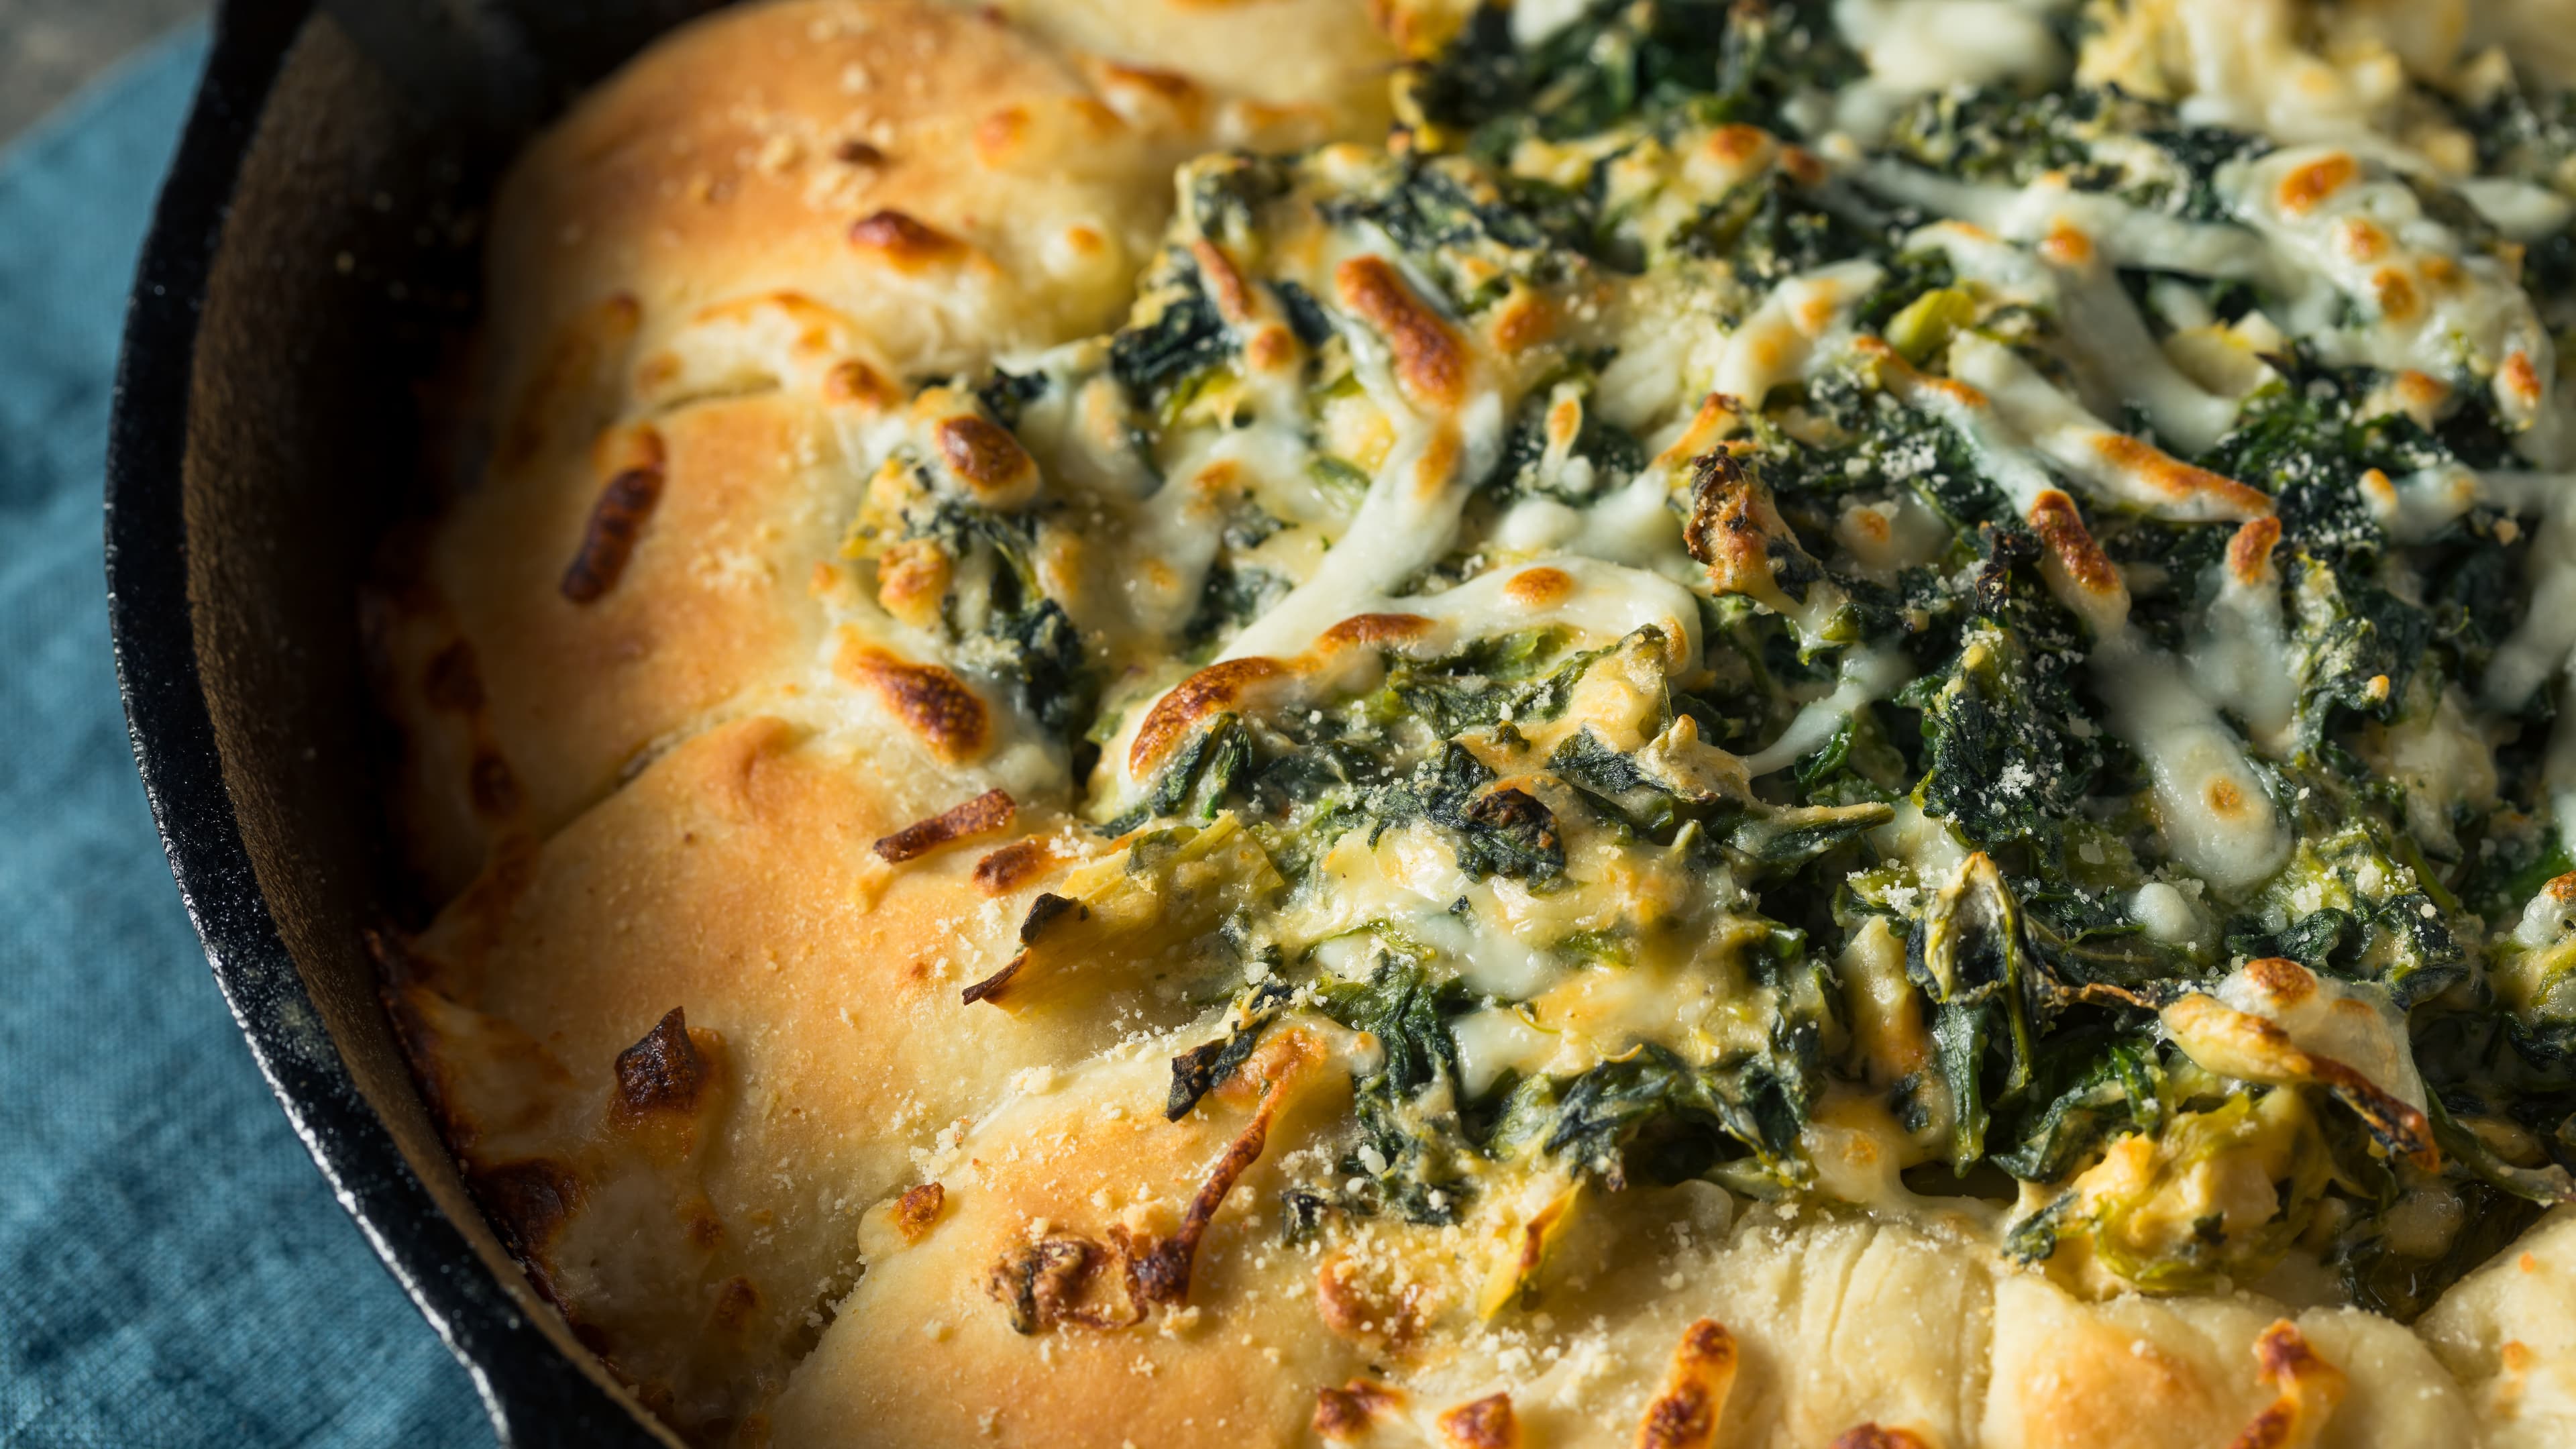 Skillet bread topped with Applebee's spinach artichoke dip recipe